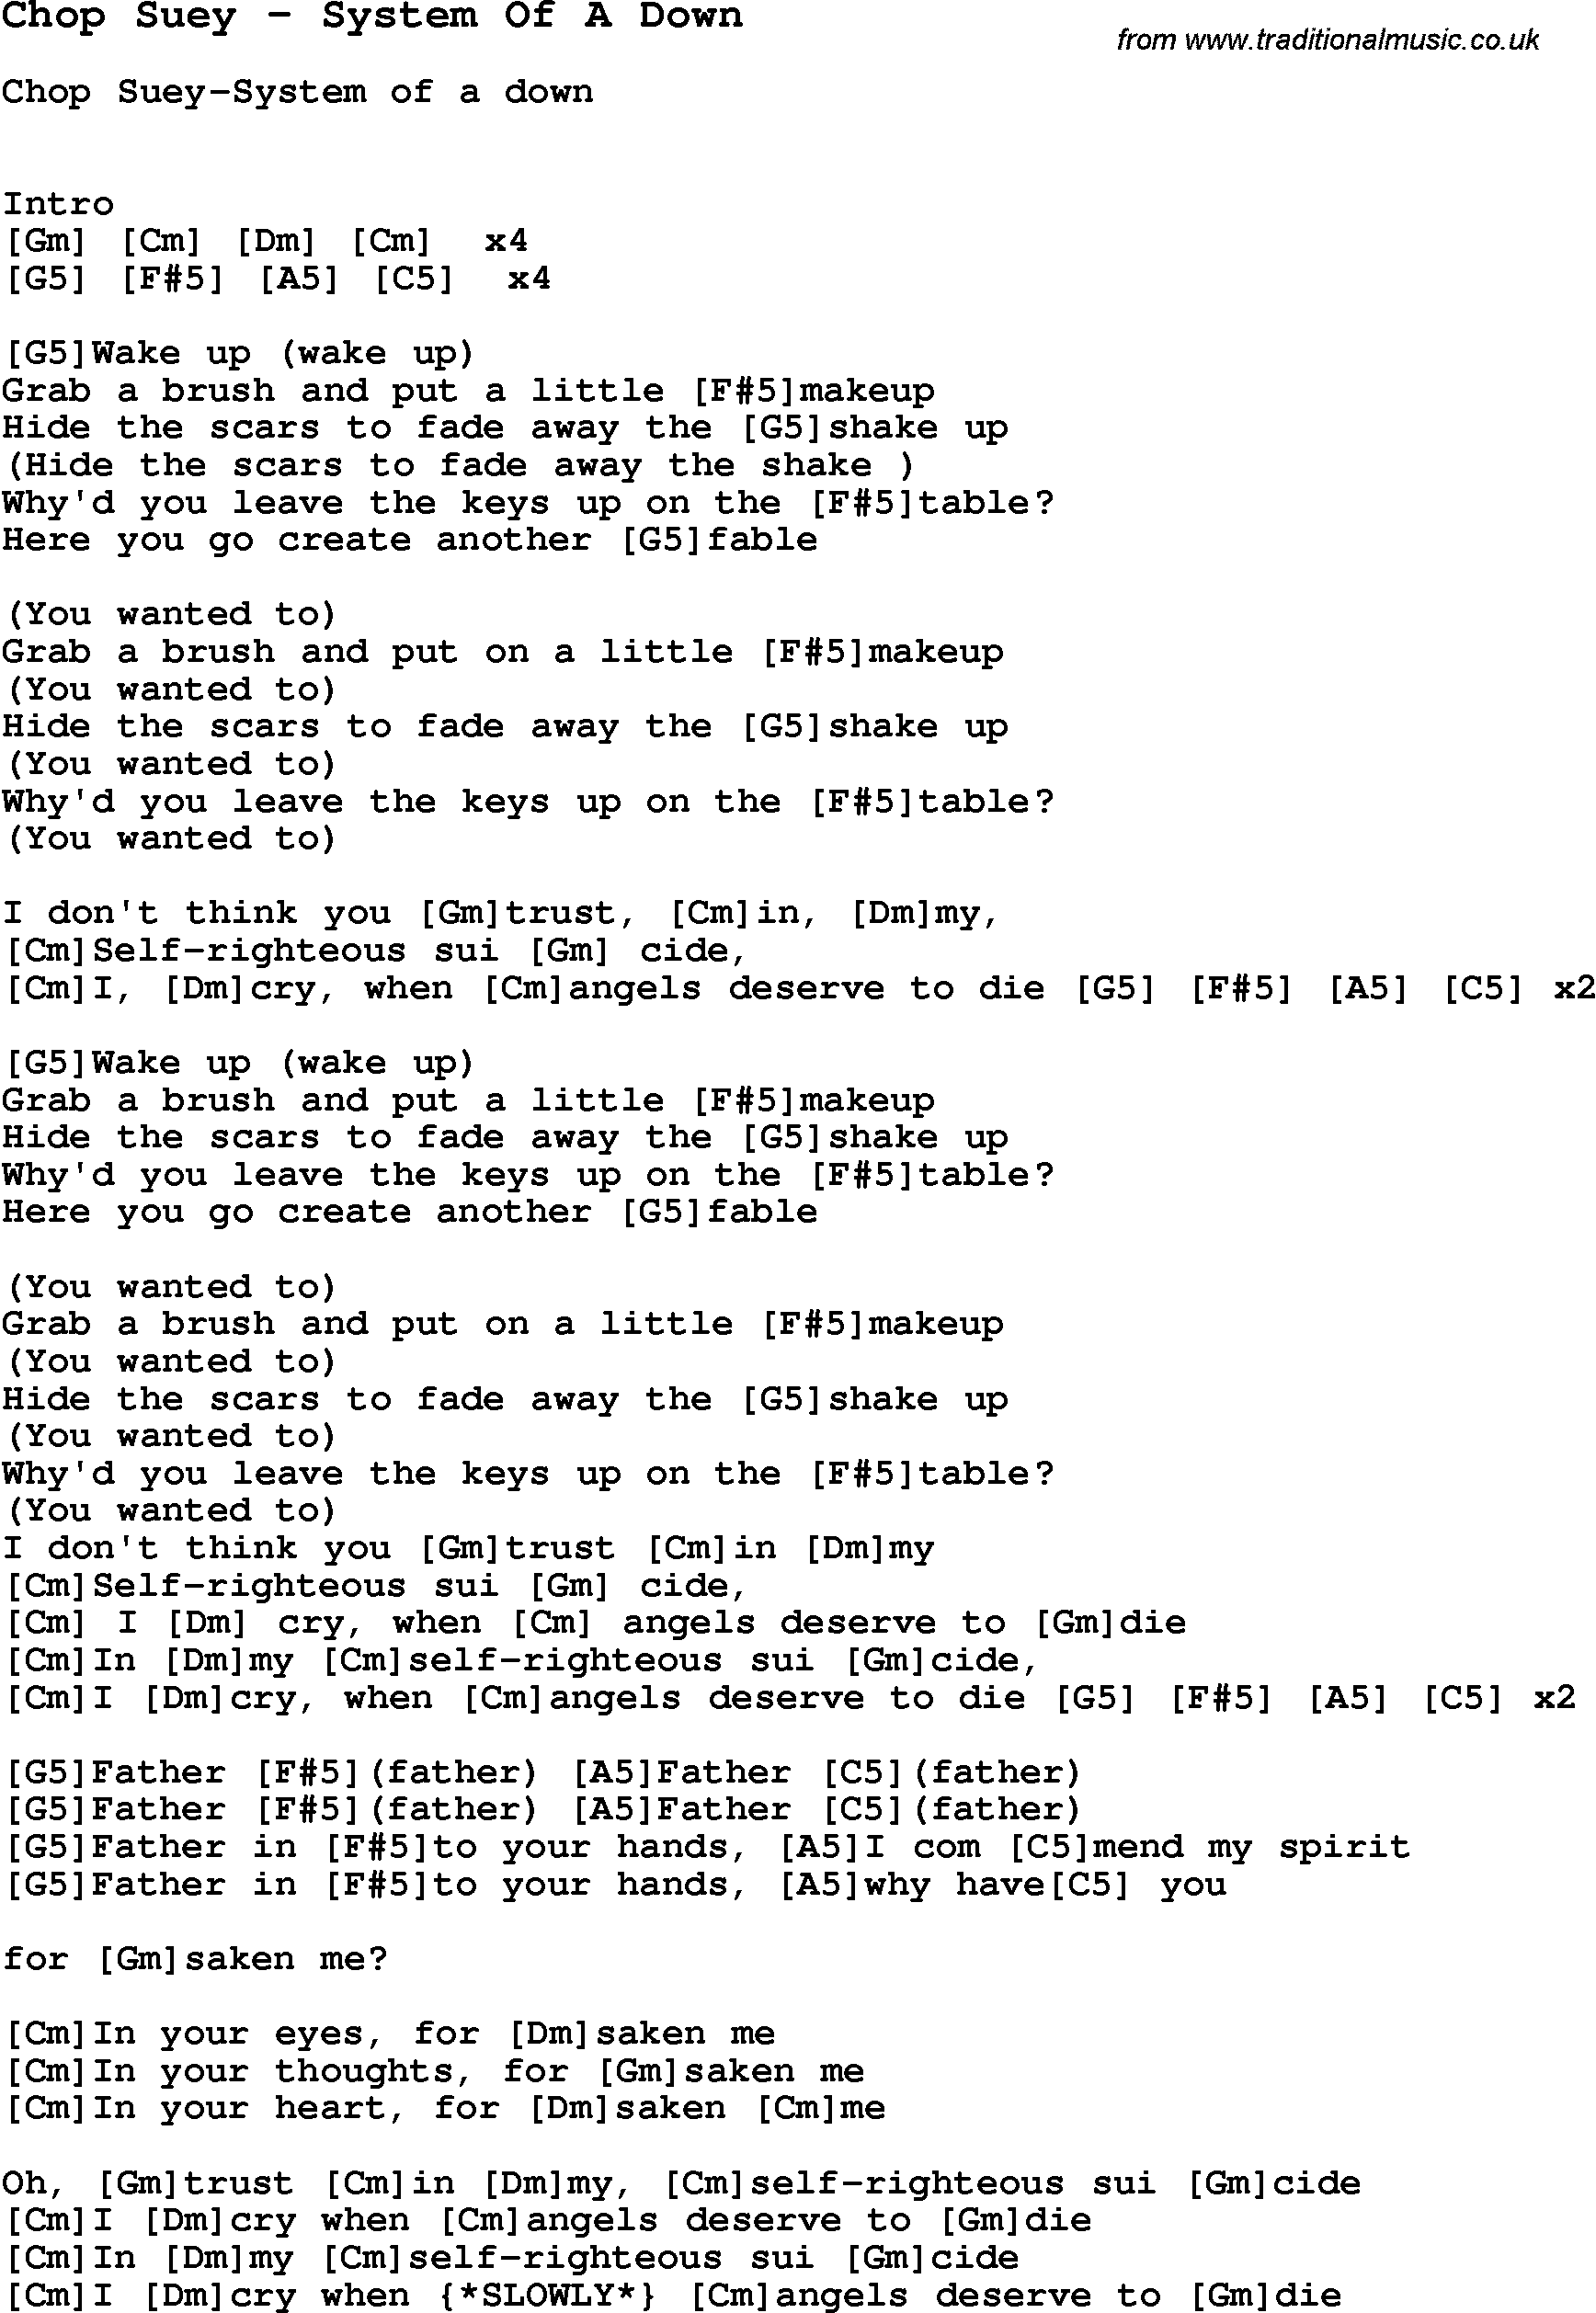 Song Chop Suey by System Of A Down, with lyrics for vocal performance and accompaniment chords for Ukulele, Guitar Banjo etc.